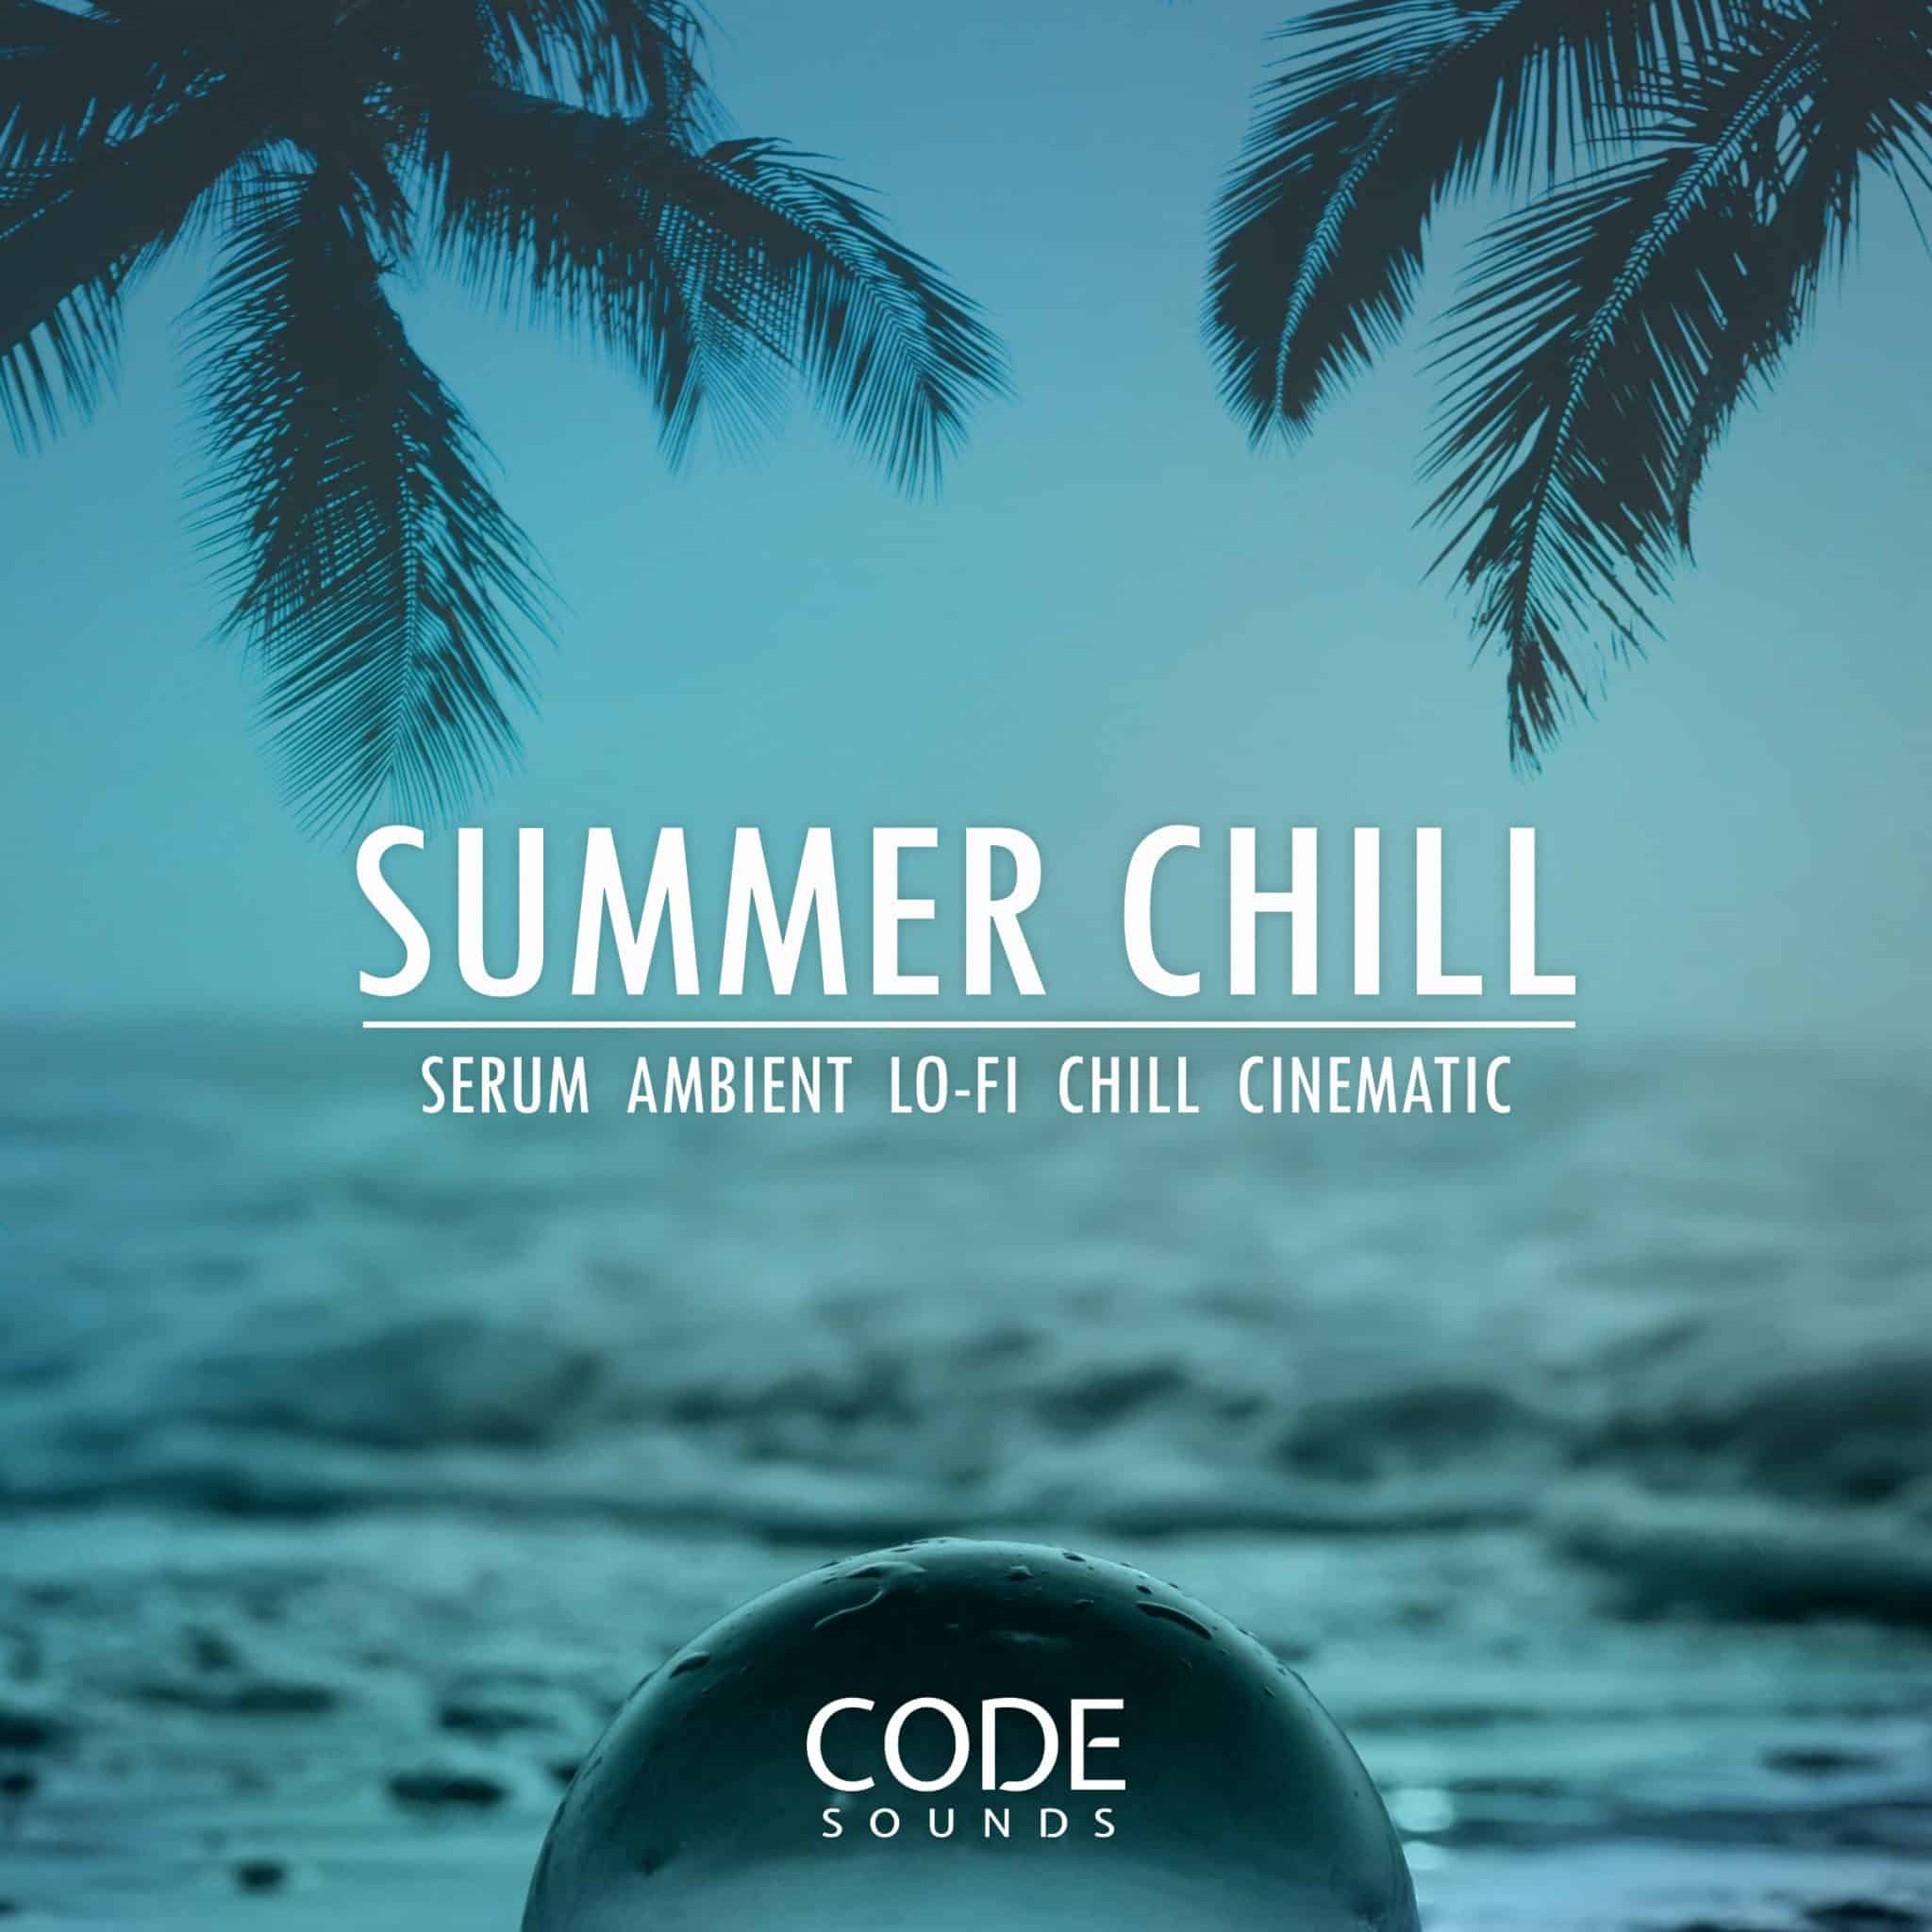 84% off “Summer Chill Bundle” by Code Sounds